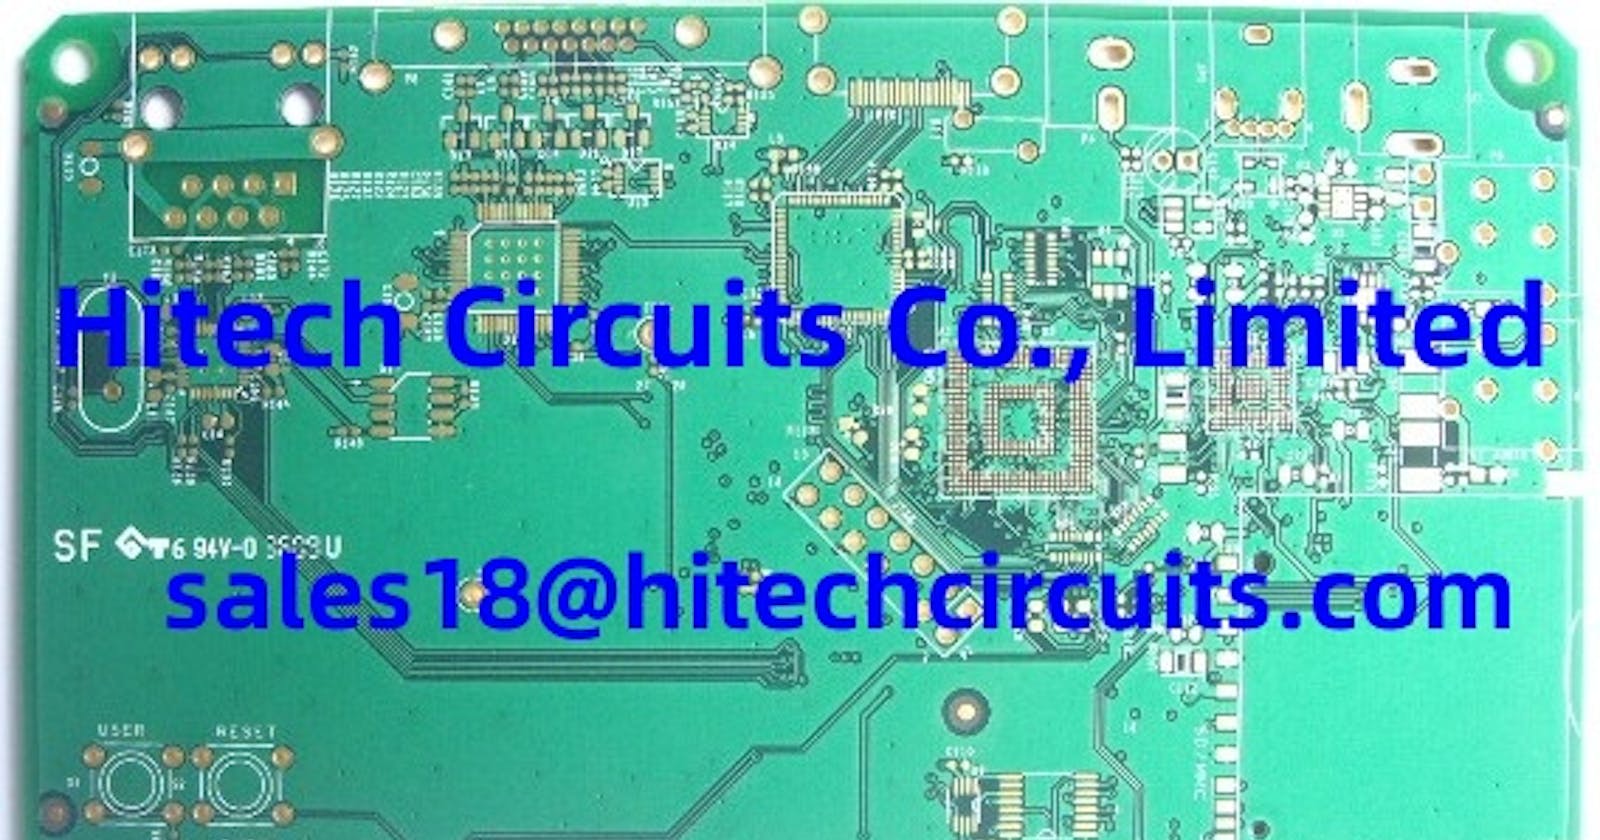 Applications of high-density interconnected PCB boards